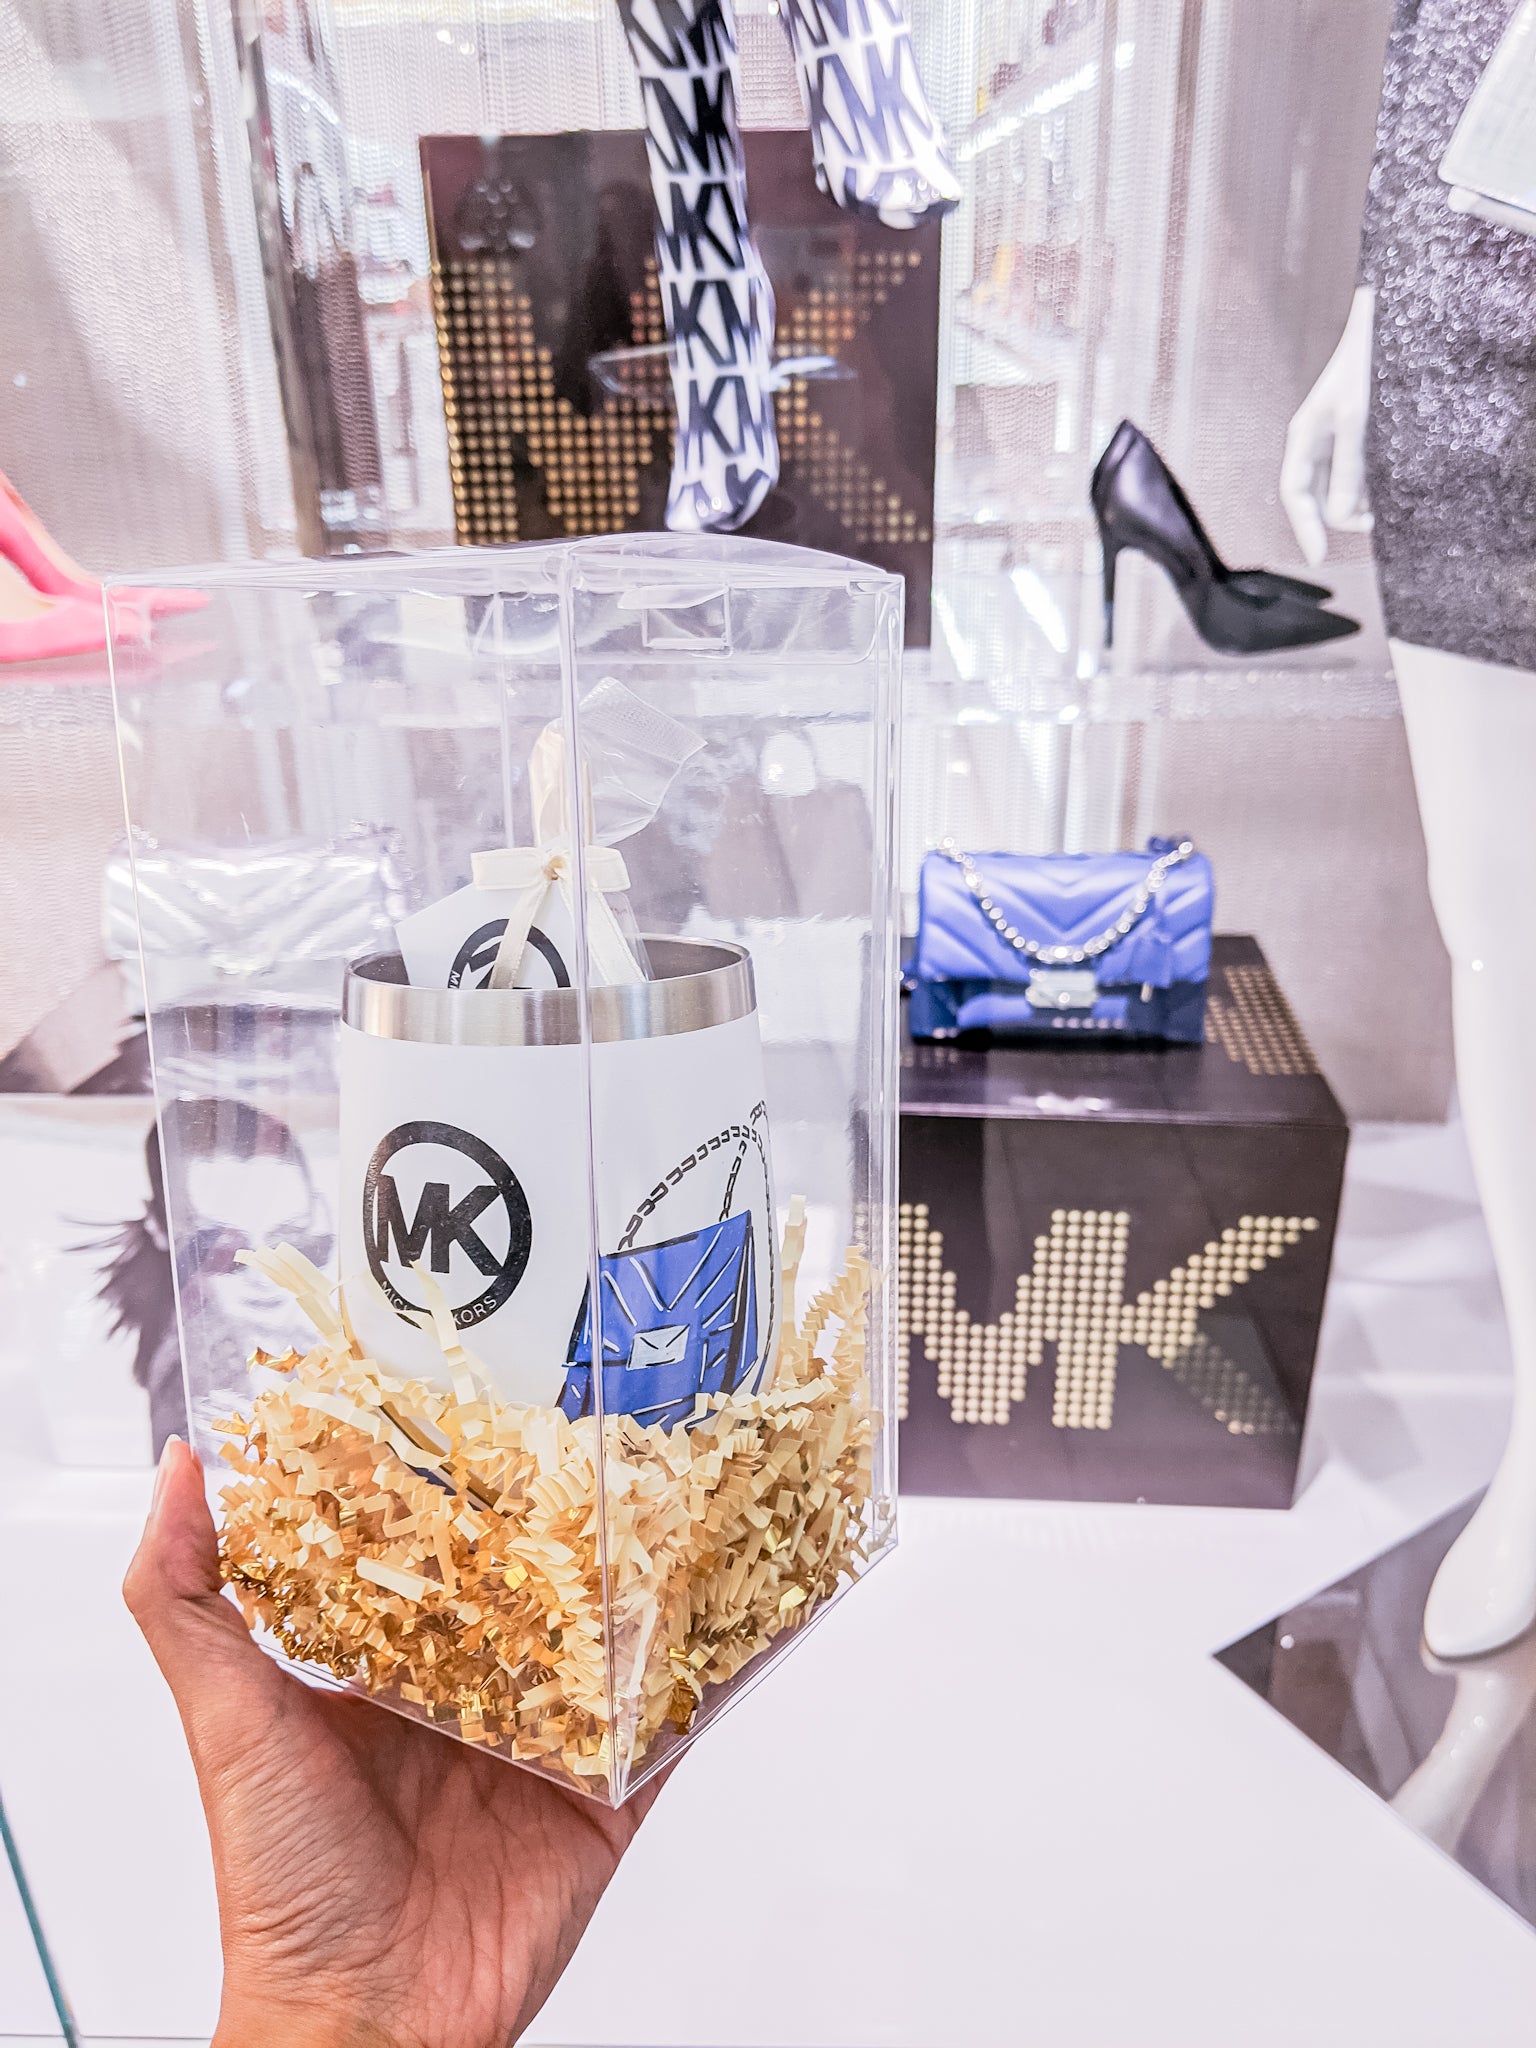 Curated Dry Goods for Michael Kors thermos on display in front of the Palm Beach retail store windows